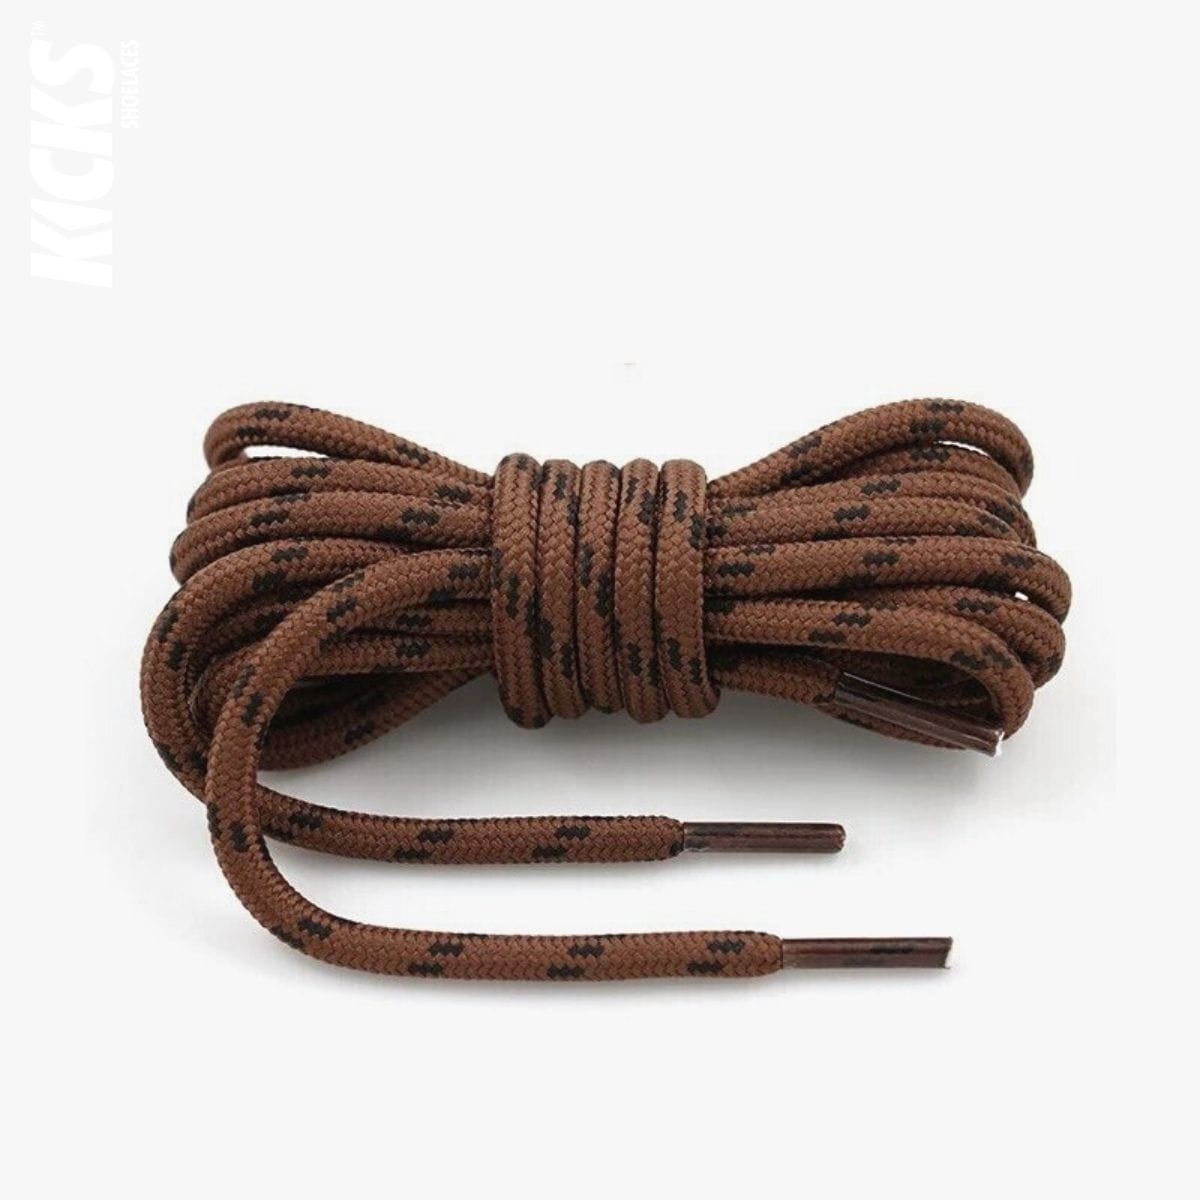 trekking-shoe-laces-united-states-in-deep-brown-and-black-shop-online